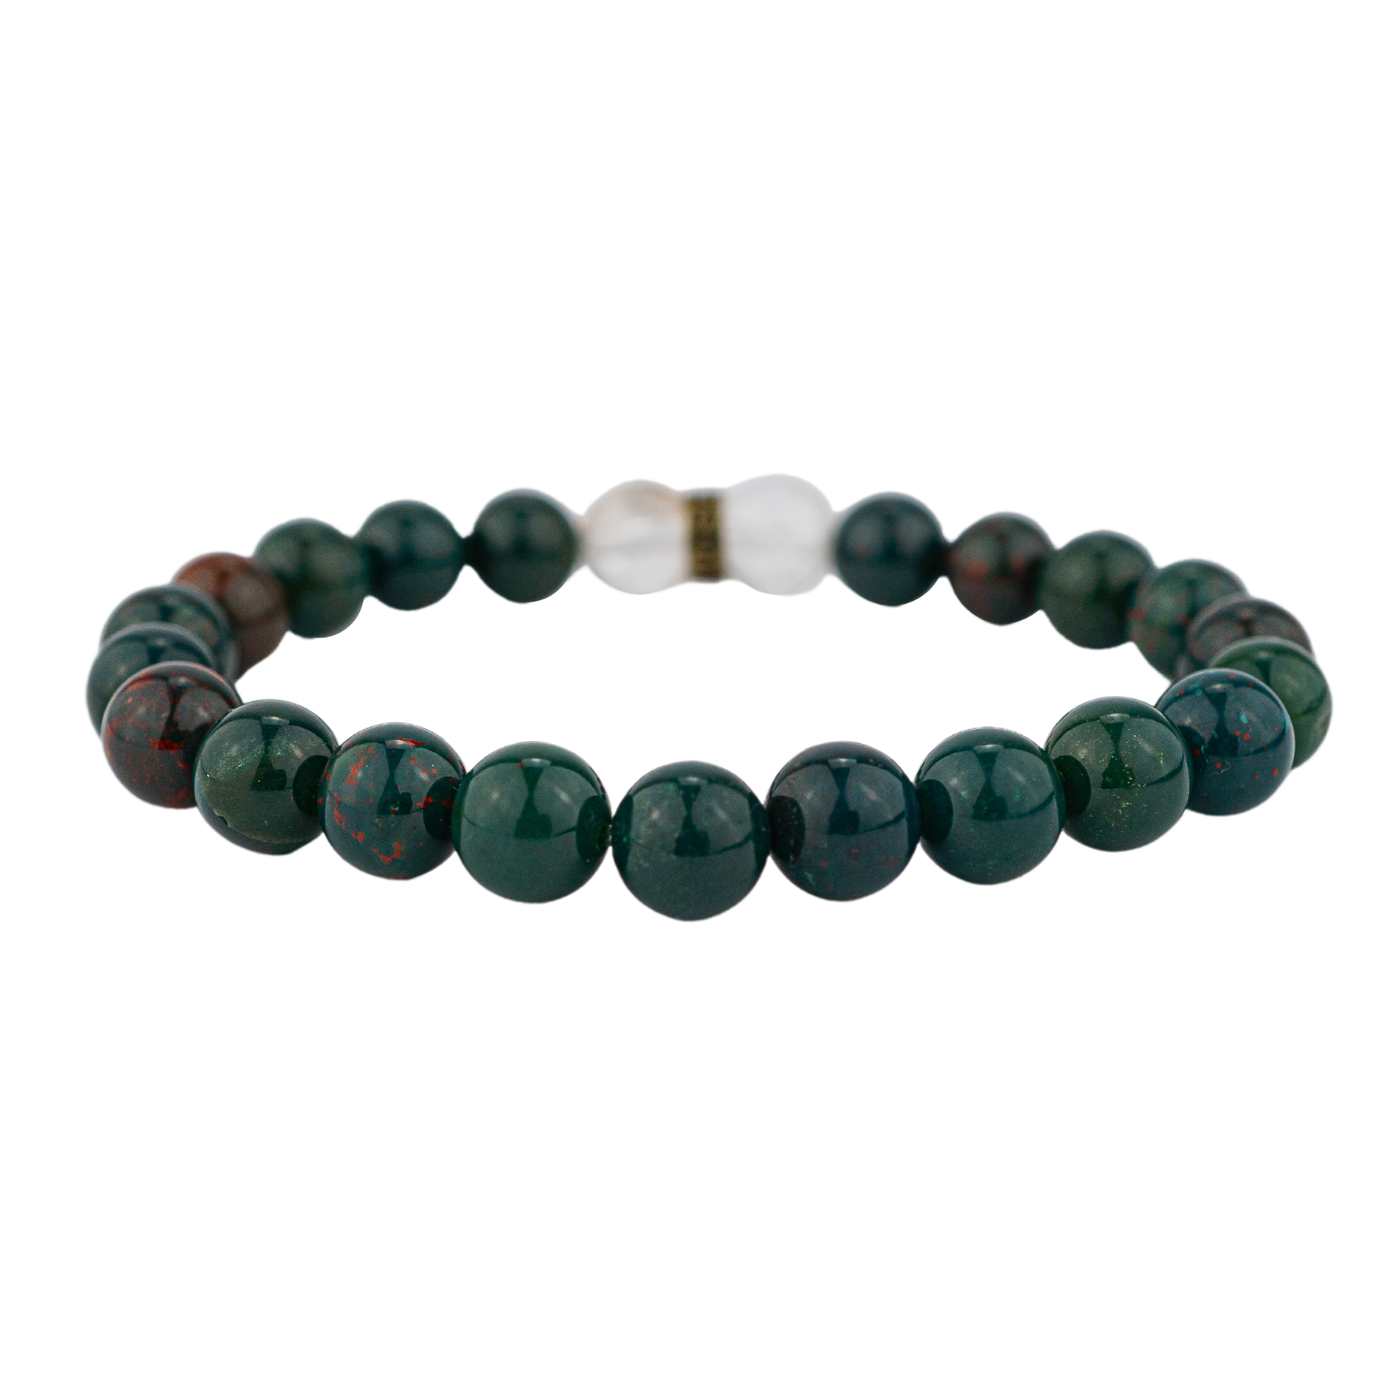 product view of genuine Bloodstone bead stretch elastic crystal bracelet by Energy Muse